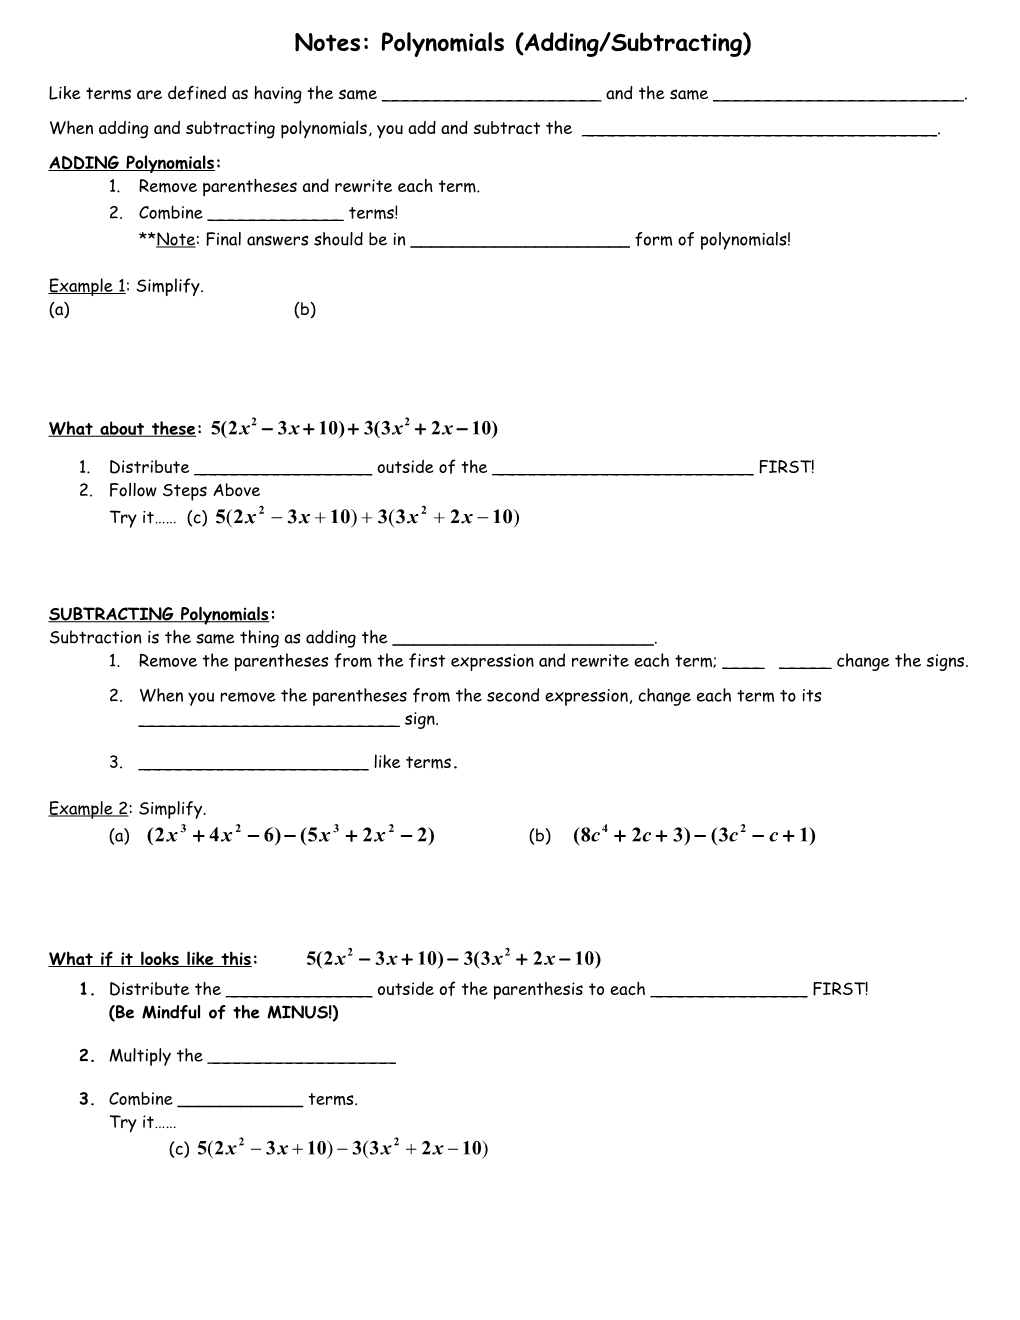 Adding and Subtracting Polynomials Notes